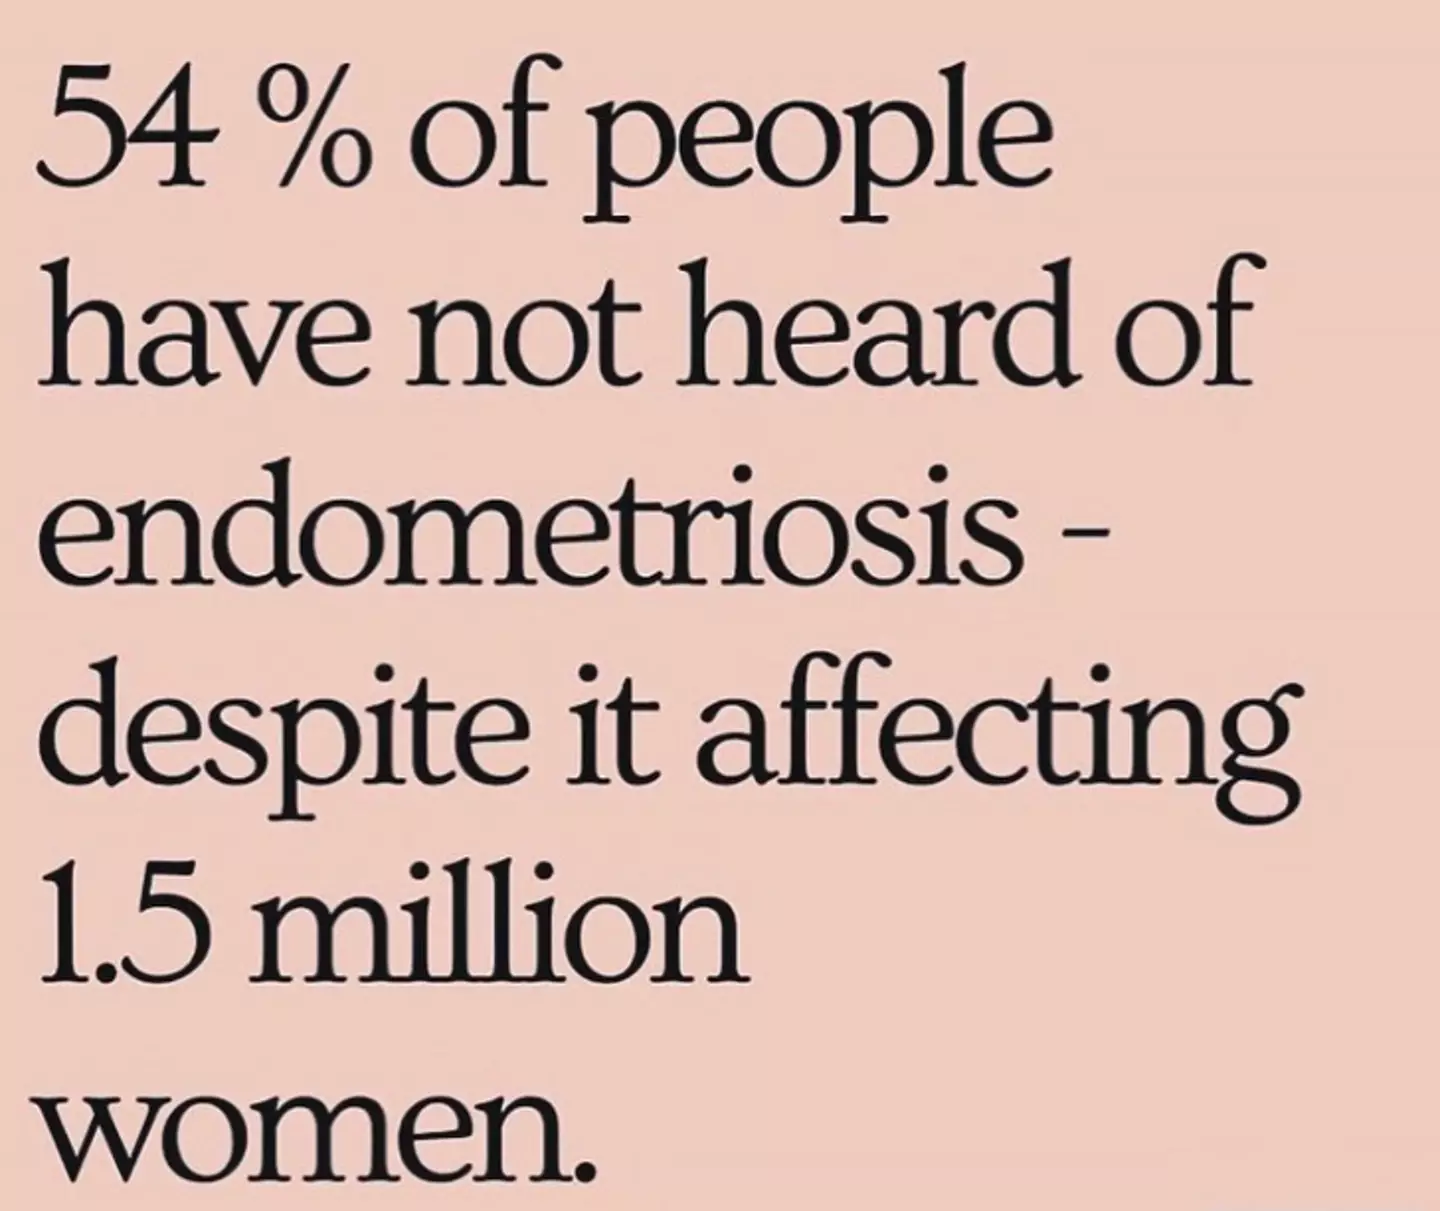 Endometriosis remains a condition which many haven't even heard of.